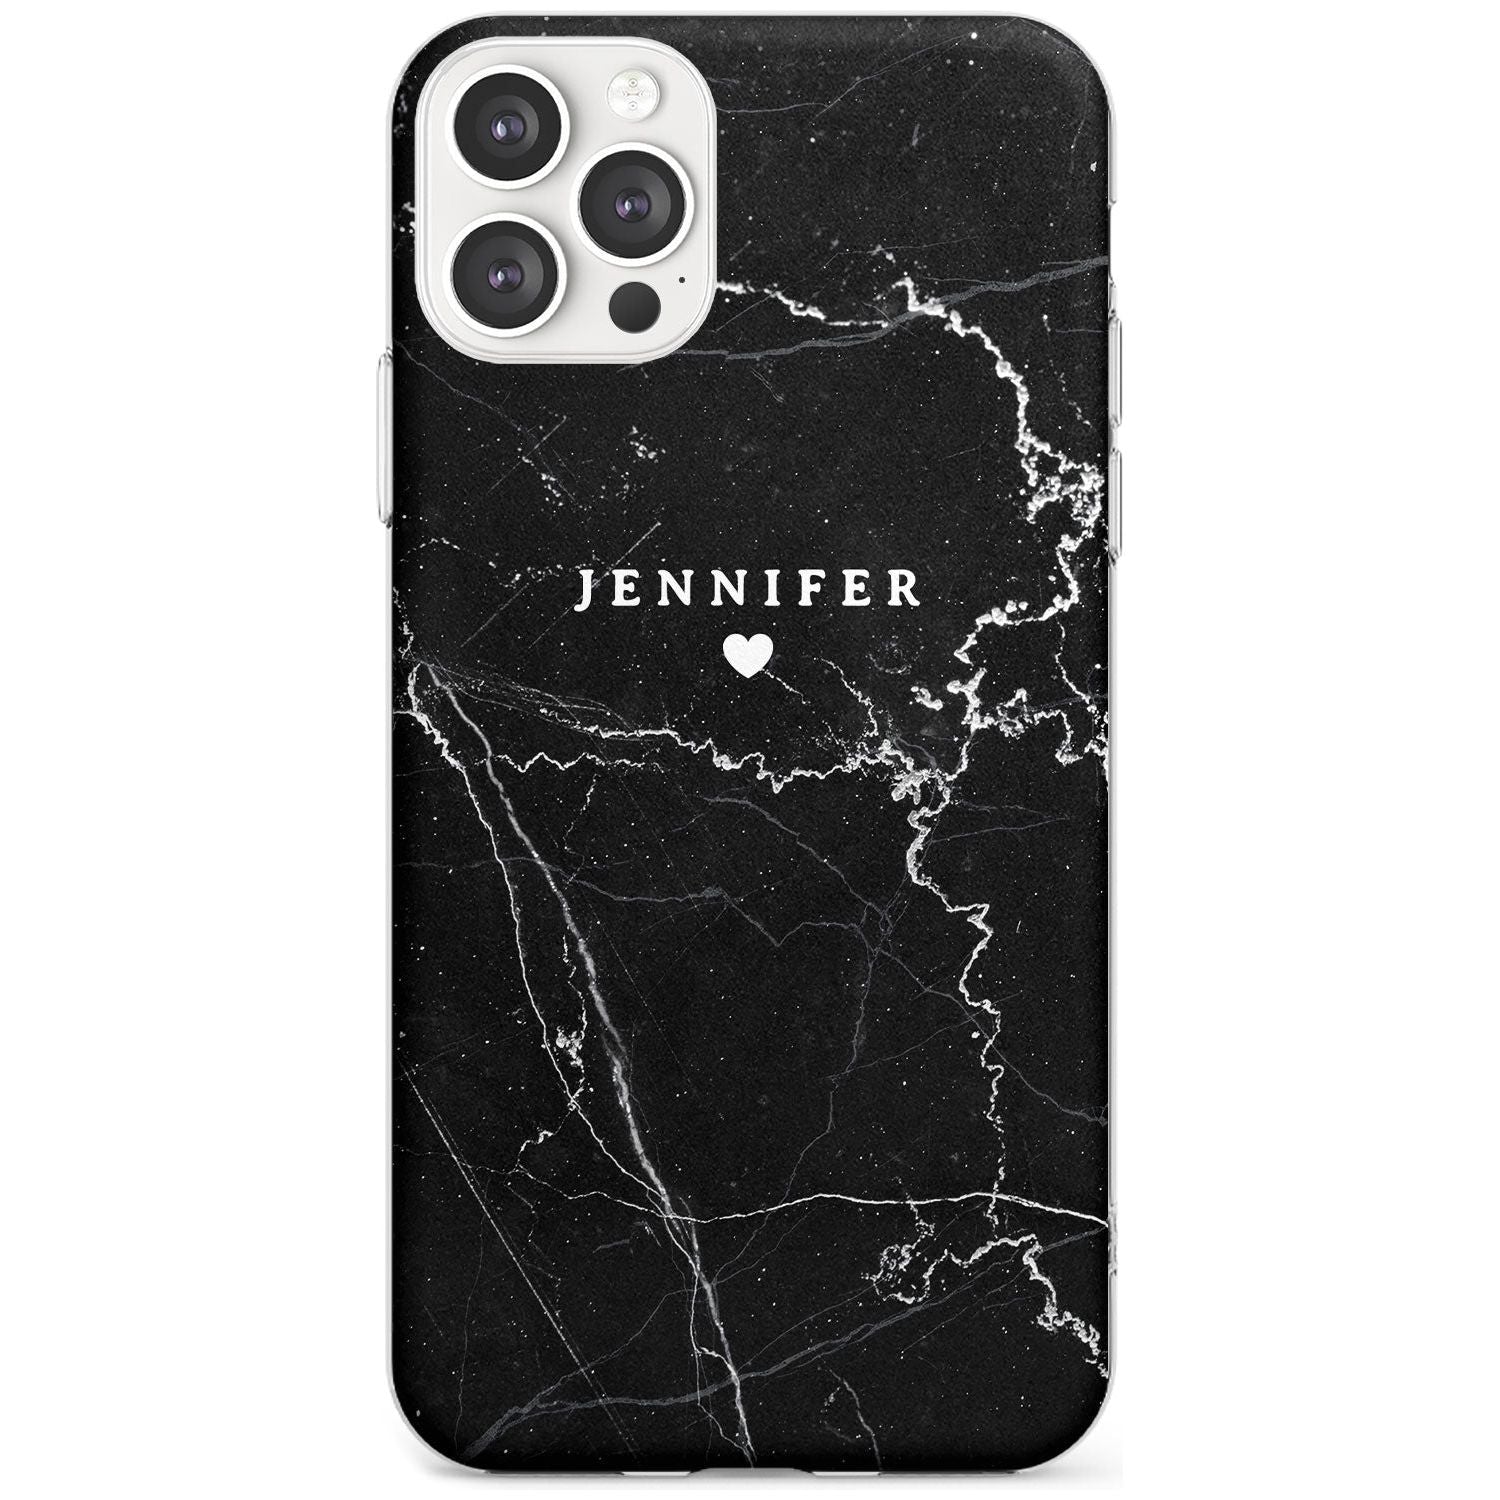 Personalised Black Marble Black Impact Phone Case for iPhone 11 Pro Max